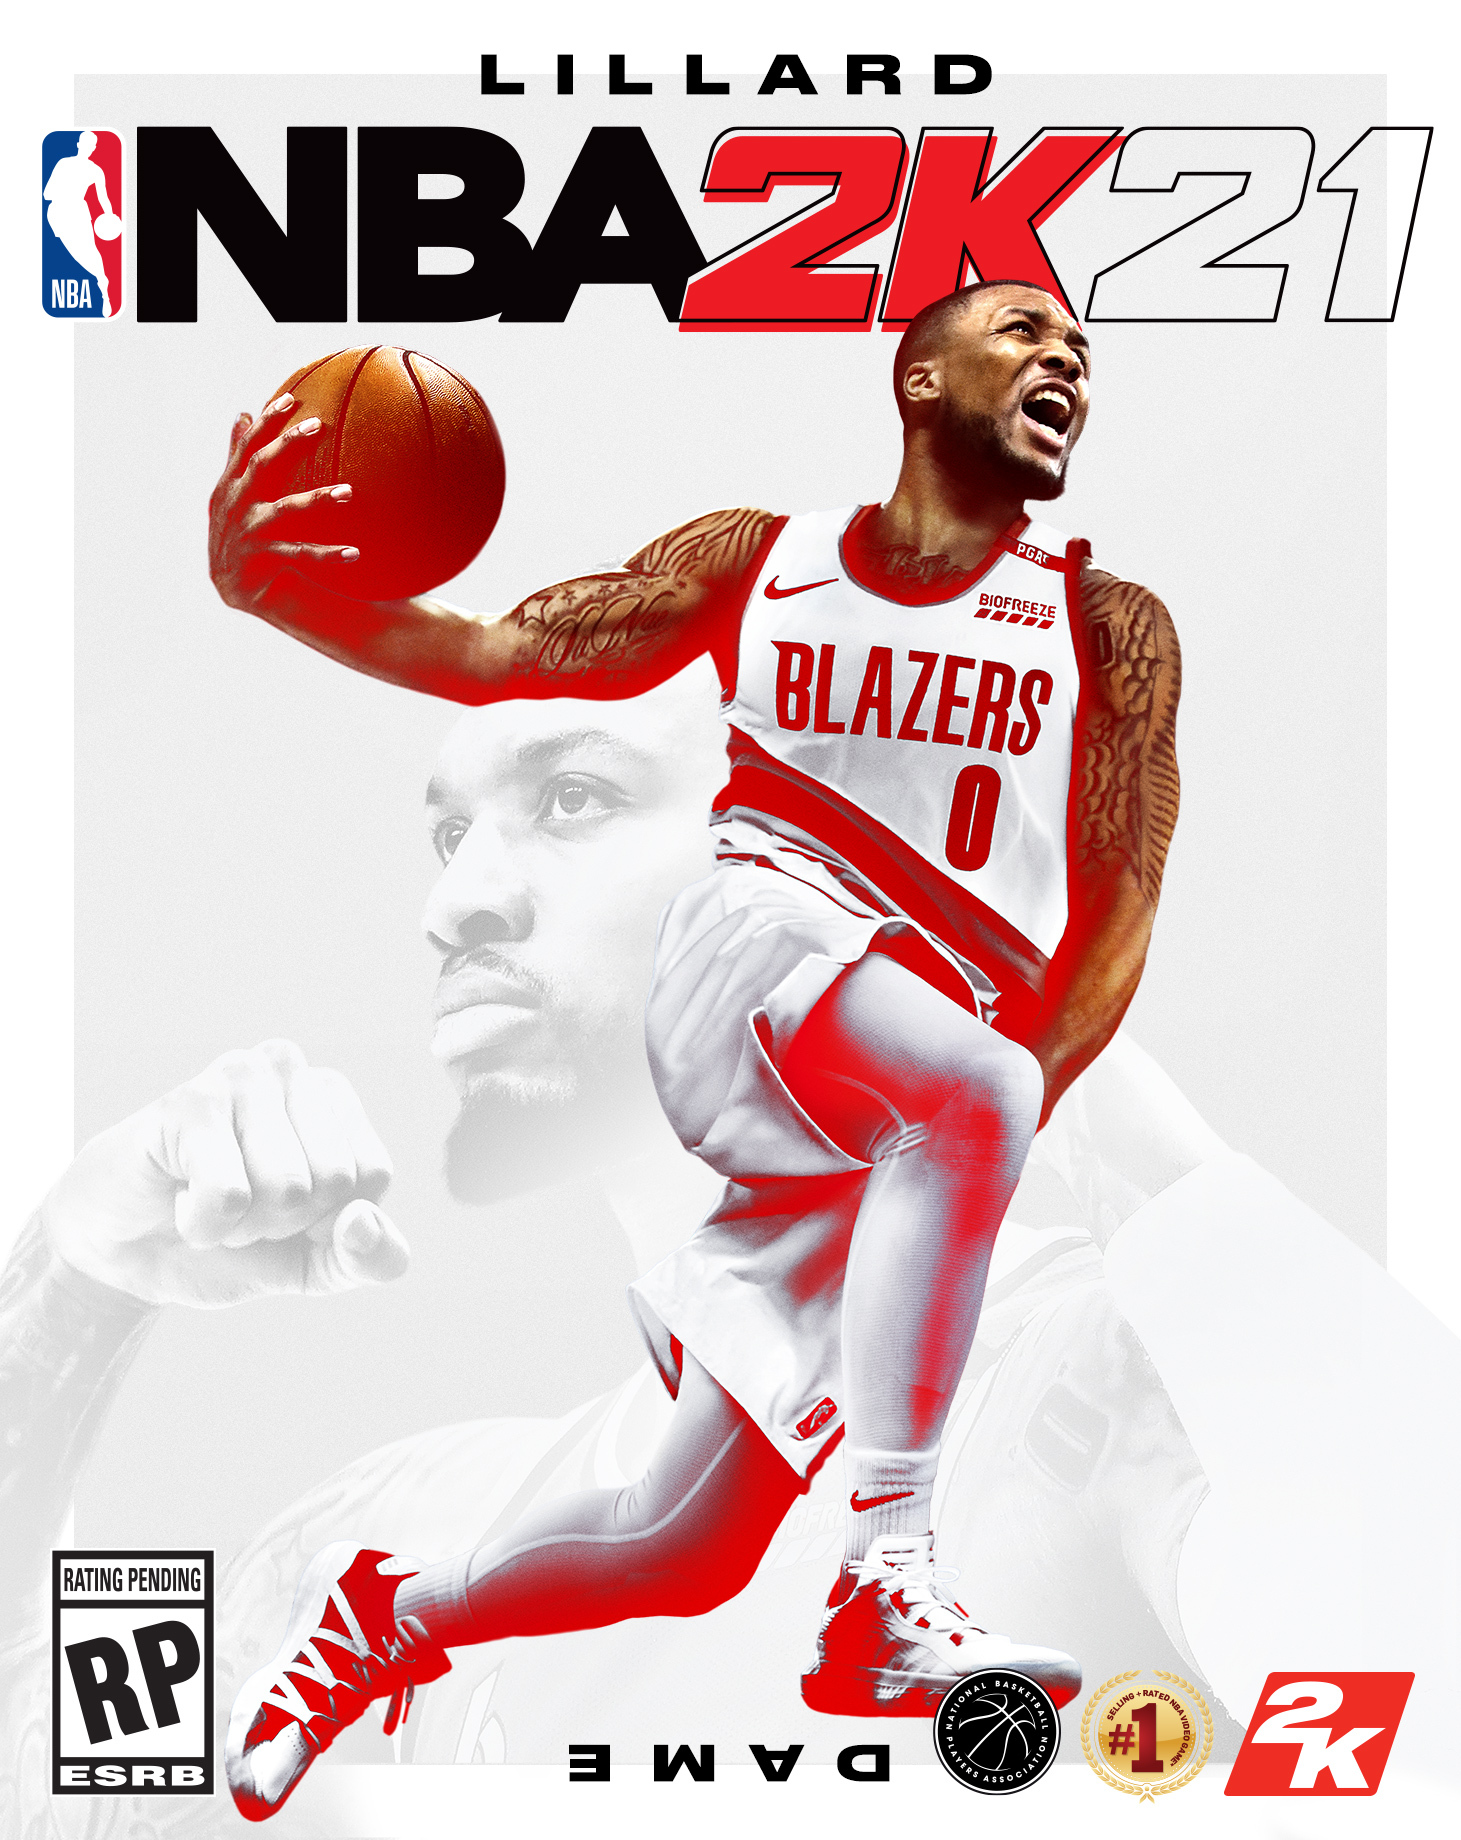 Zion Williamson, Damian Lillard named cover athletes for NBA 2K21